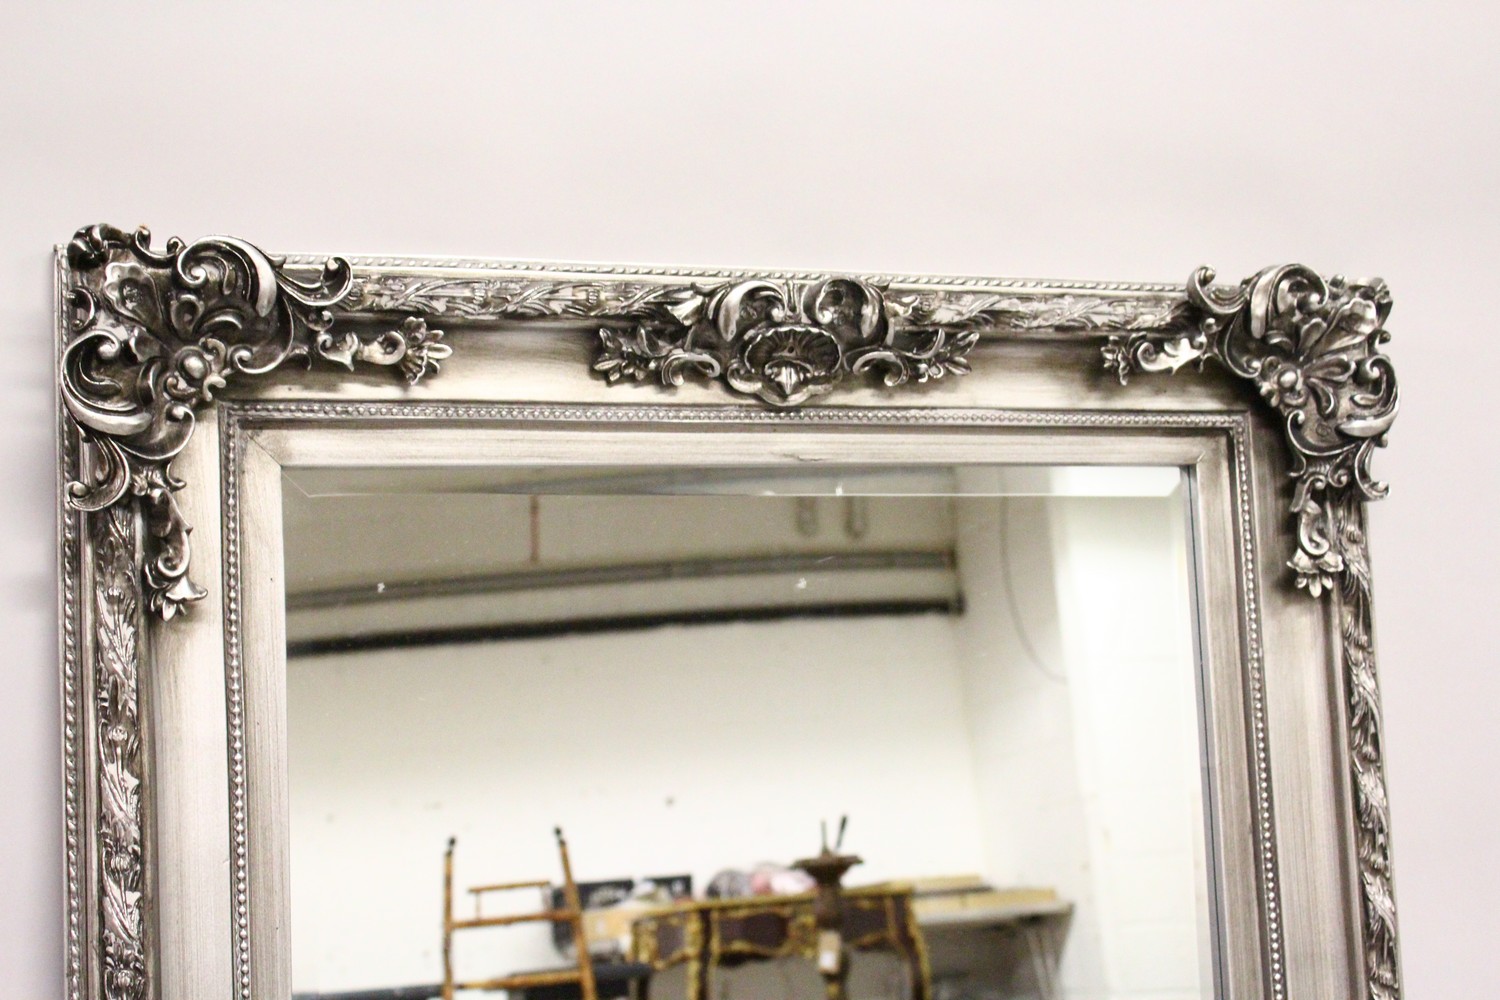 A LARGE WALL MIRROR, with moulded silver coloured frame. 5ft 7ins x 2ft 9ins. - Image 2 of 3